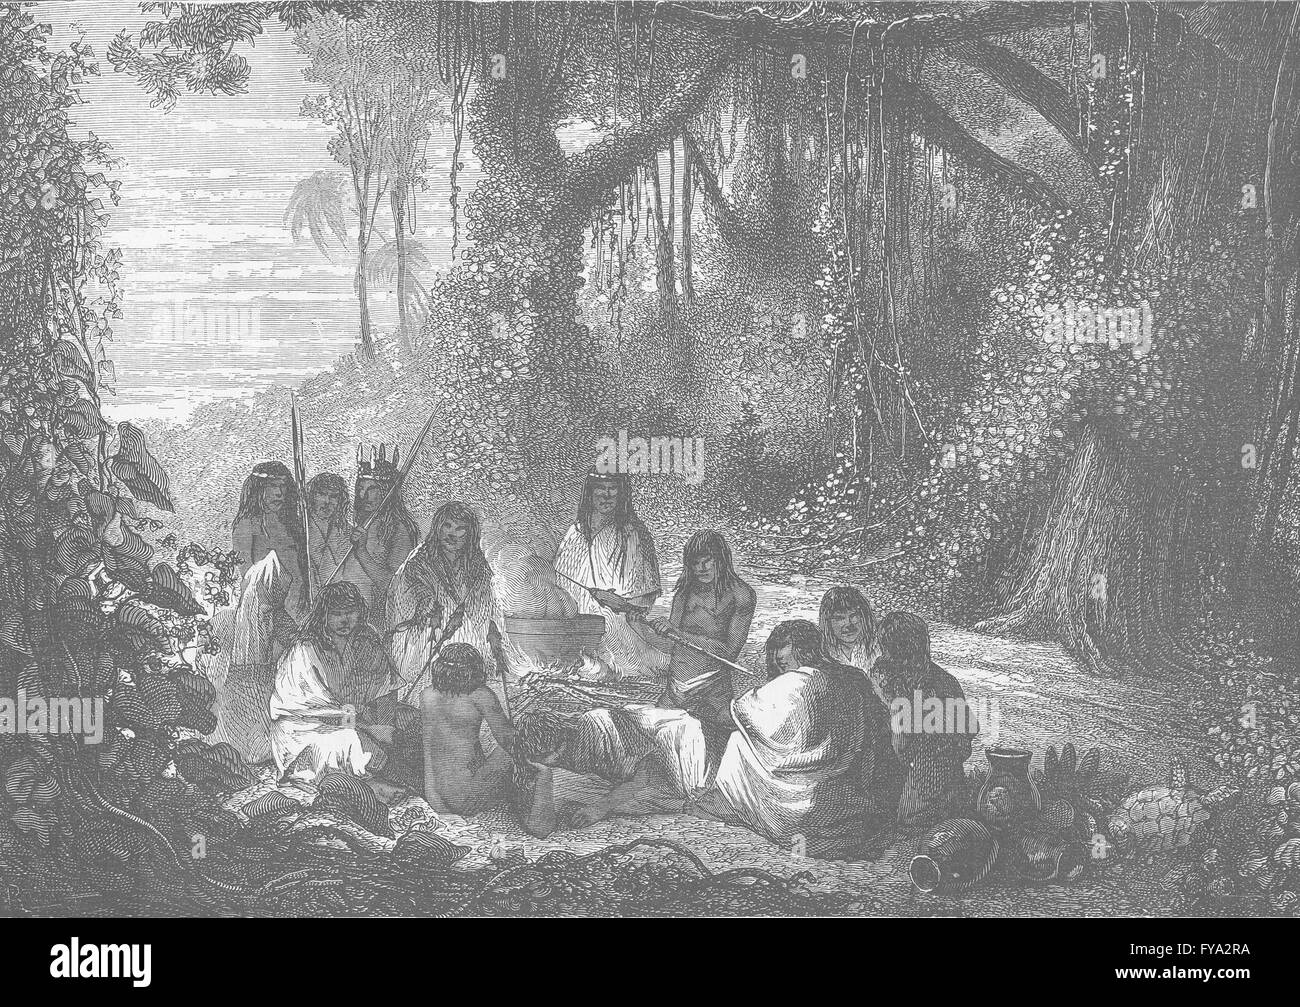 CARIBBEAN: Halt of Indians at the threshold of the forest, antique print 1890 Stock Photo